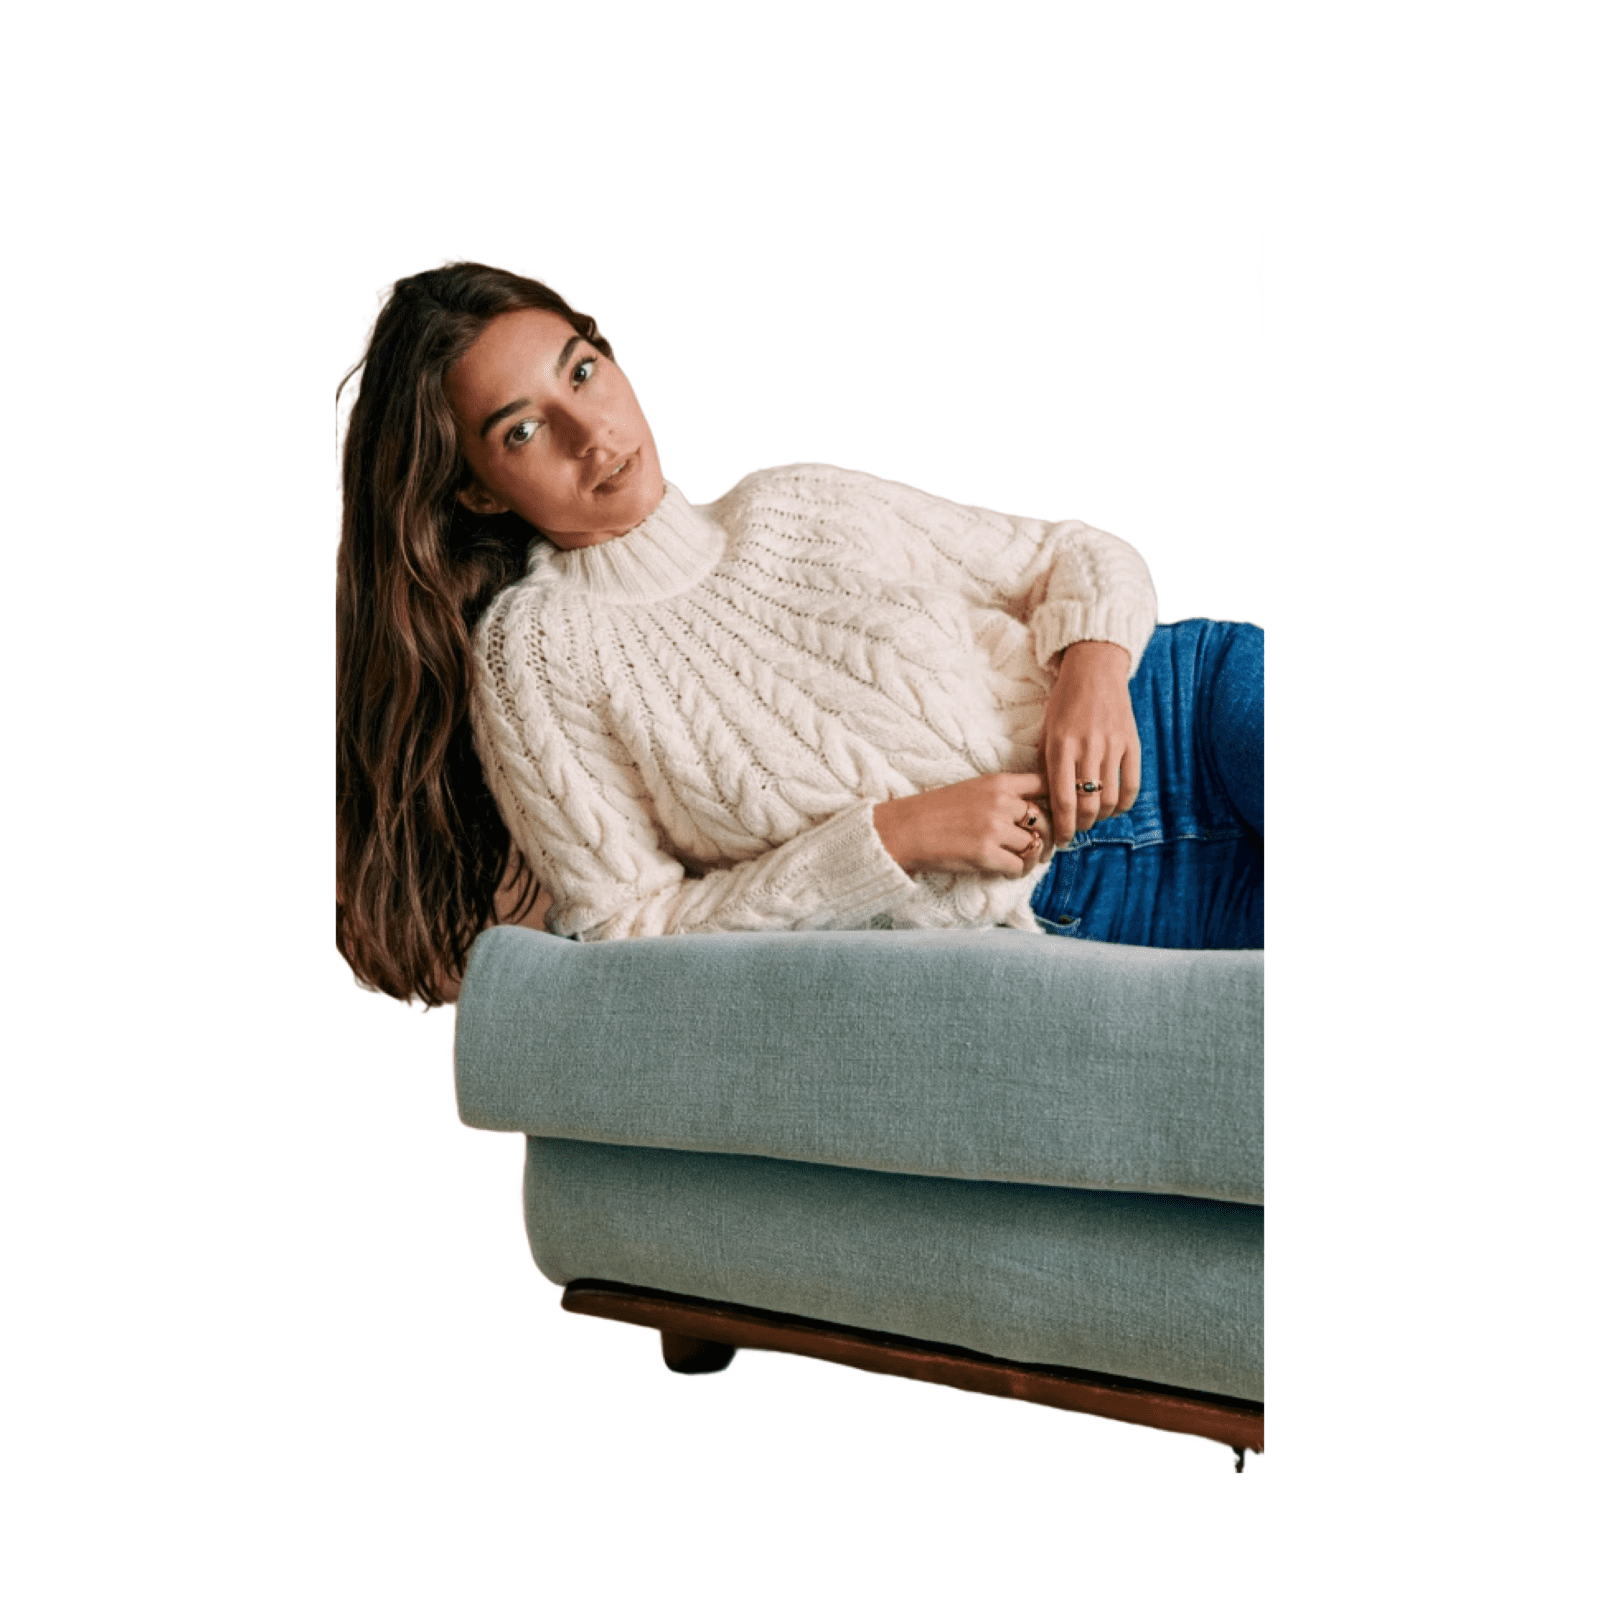 woman lying on a couch wearing a high-collared sweater